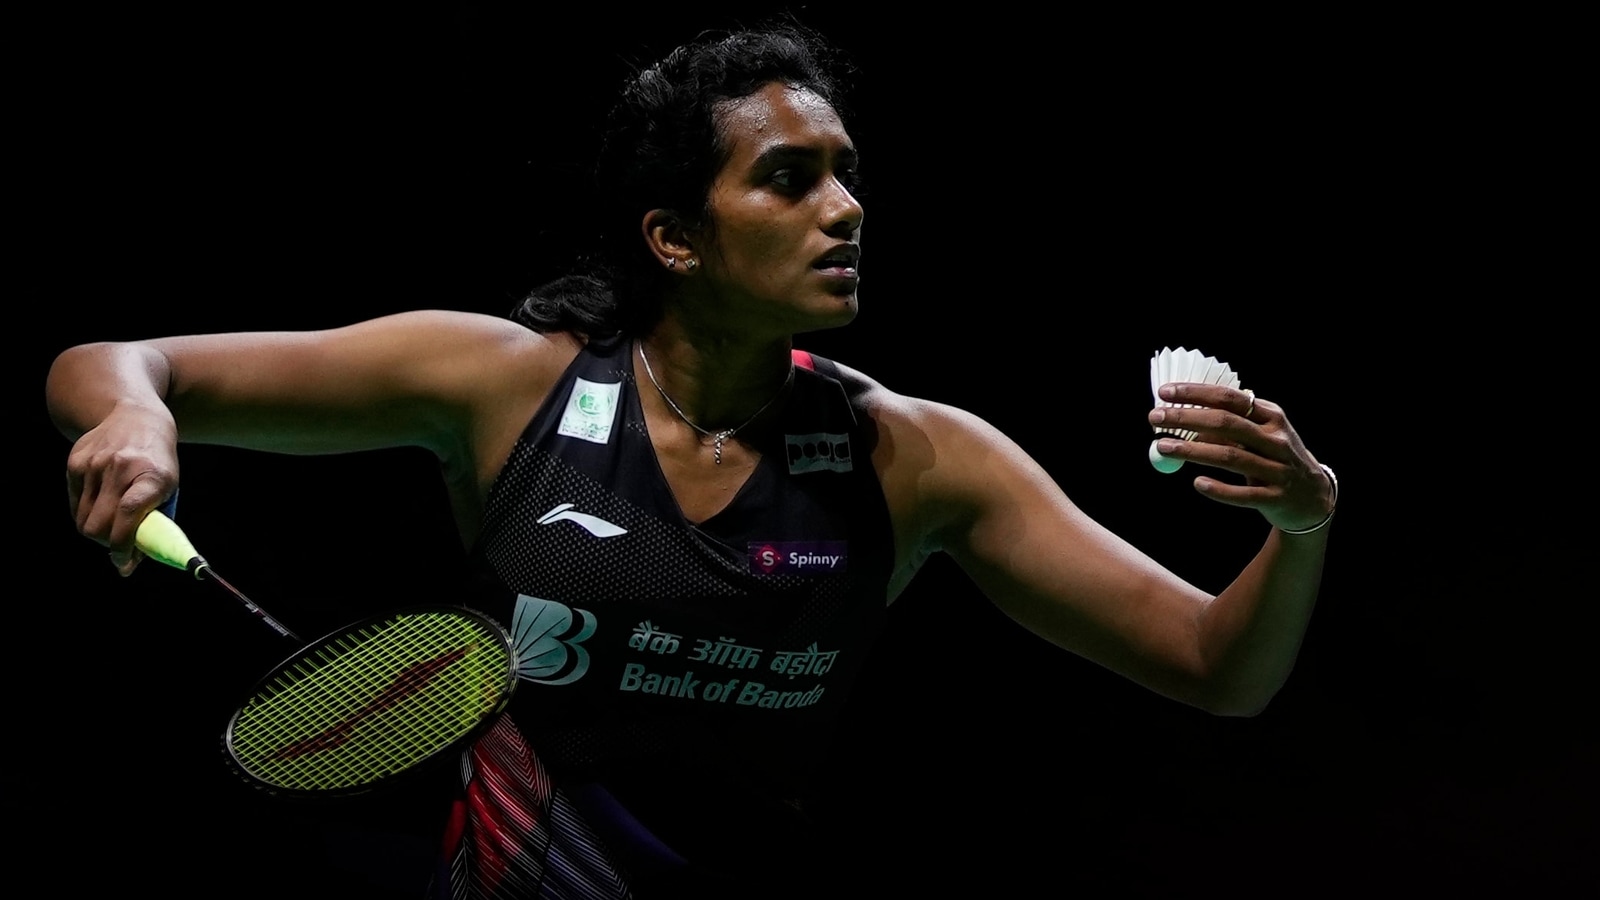 BWF World Championship 2021 Indians in action on Day 5